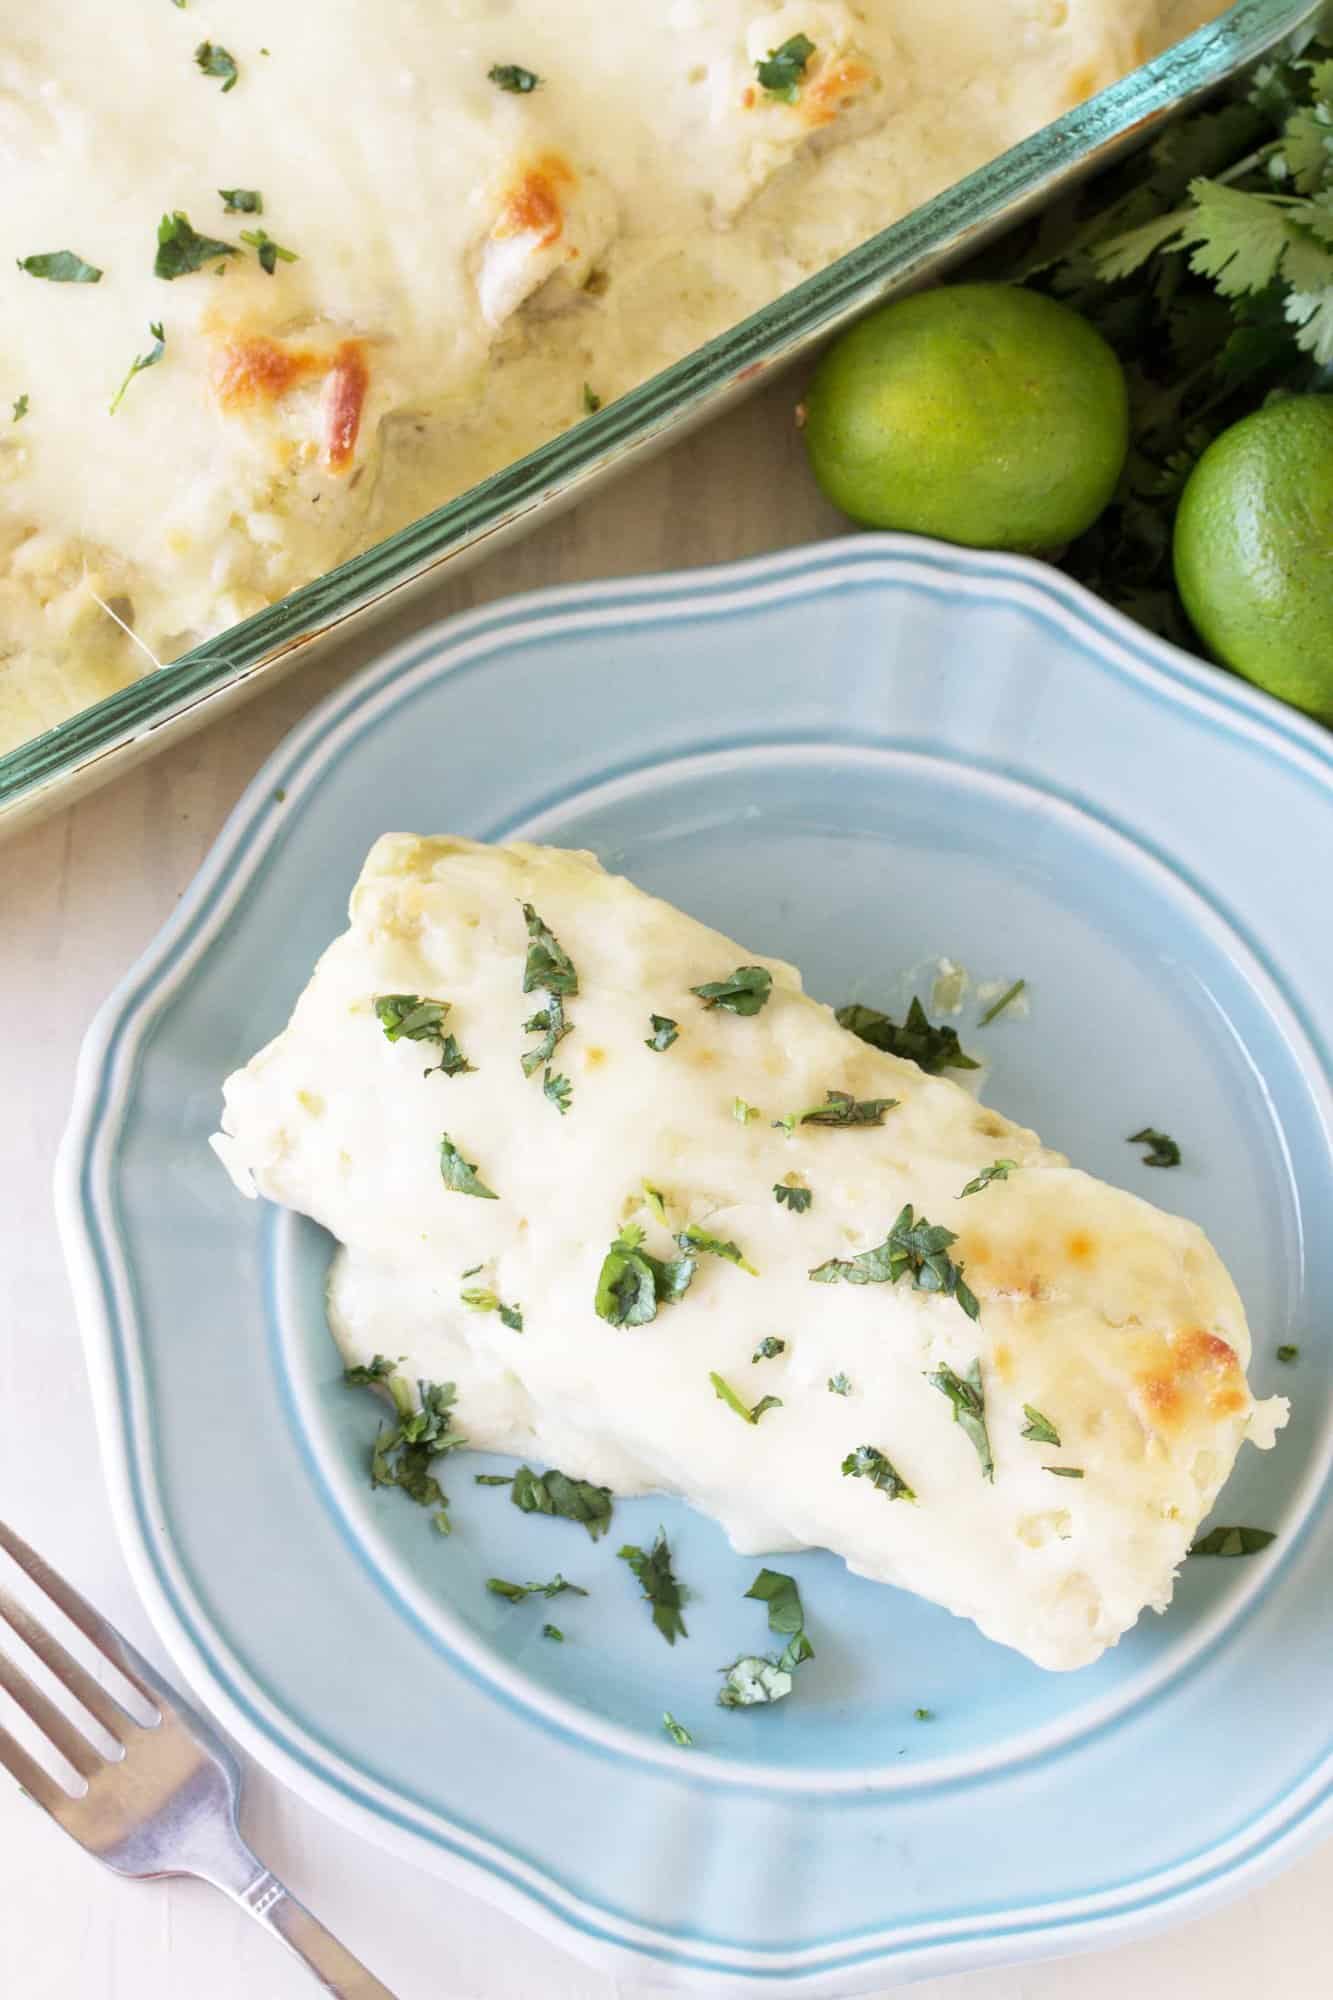 These easy to put together Green Chile Cream Cheese Enchiladas are a classic American family favorite. This version is quick to put together using fresh ingredients.